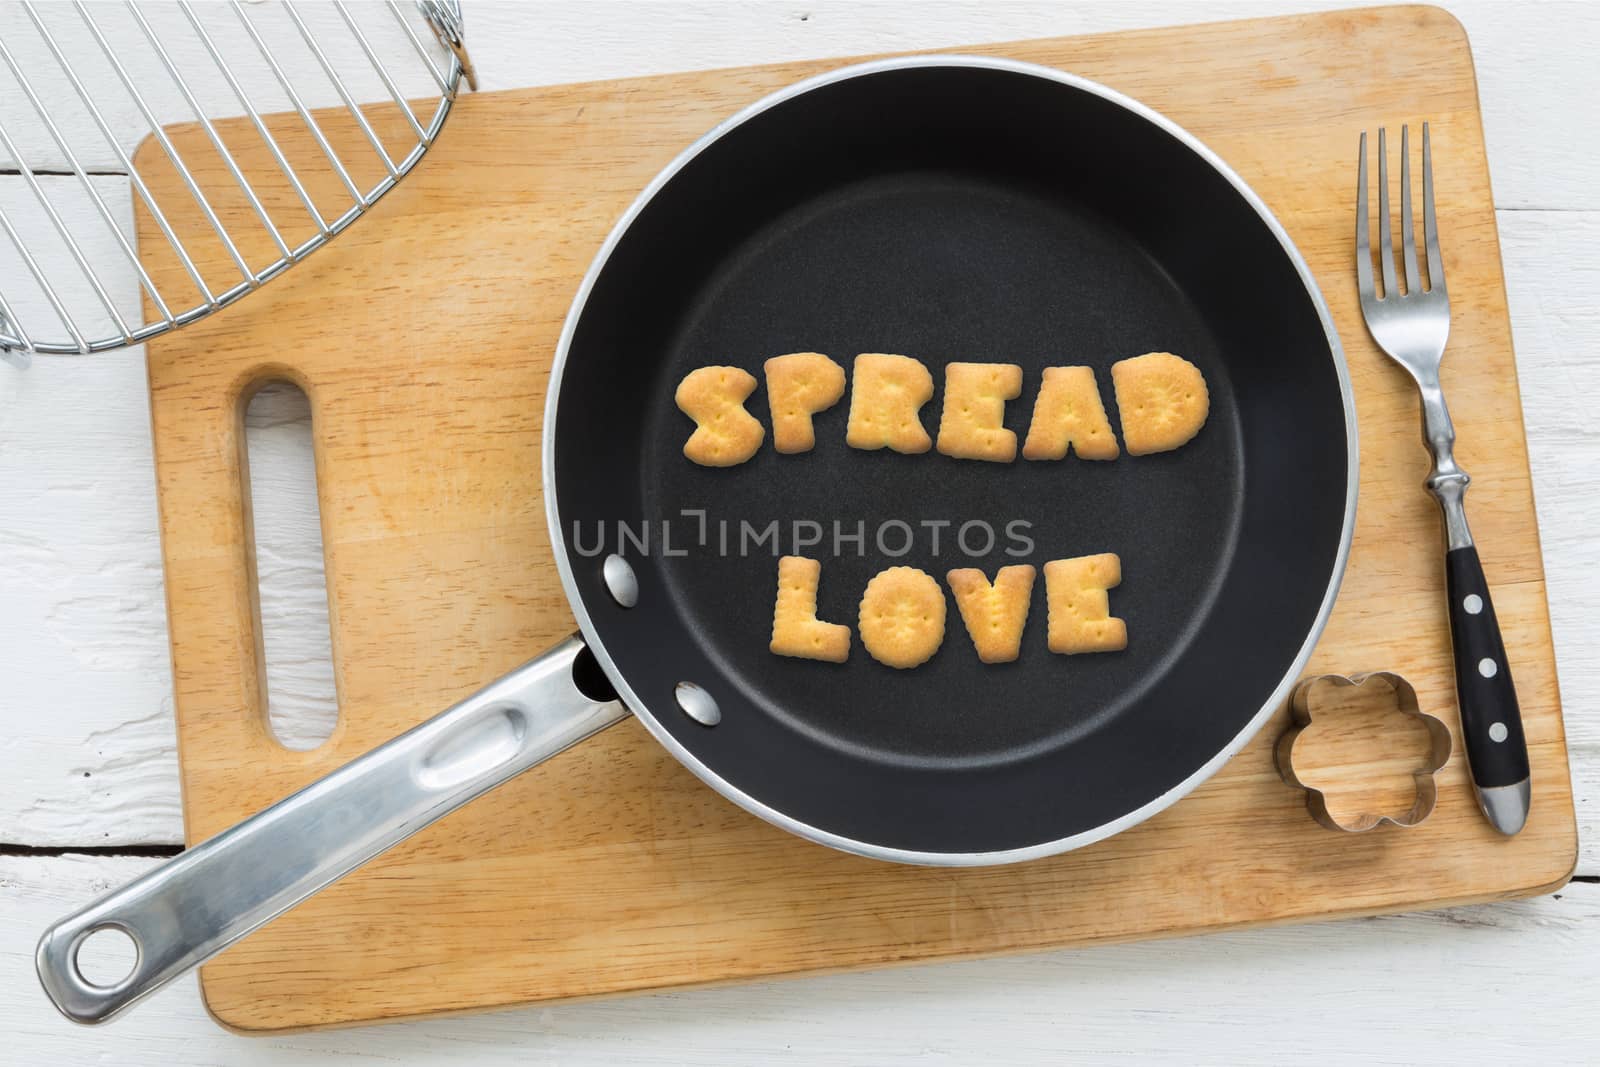 Top view of letter collage made of biscuits. Word SPREAD LOVE putting in black frying pan. Other cooking equipments: fork, cookie cutter and chopping board putting on white wooden table, vintage style image.